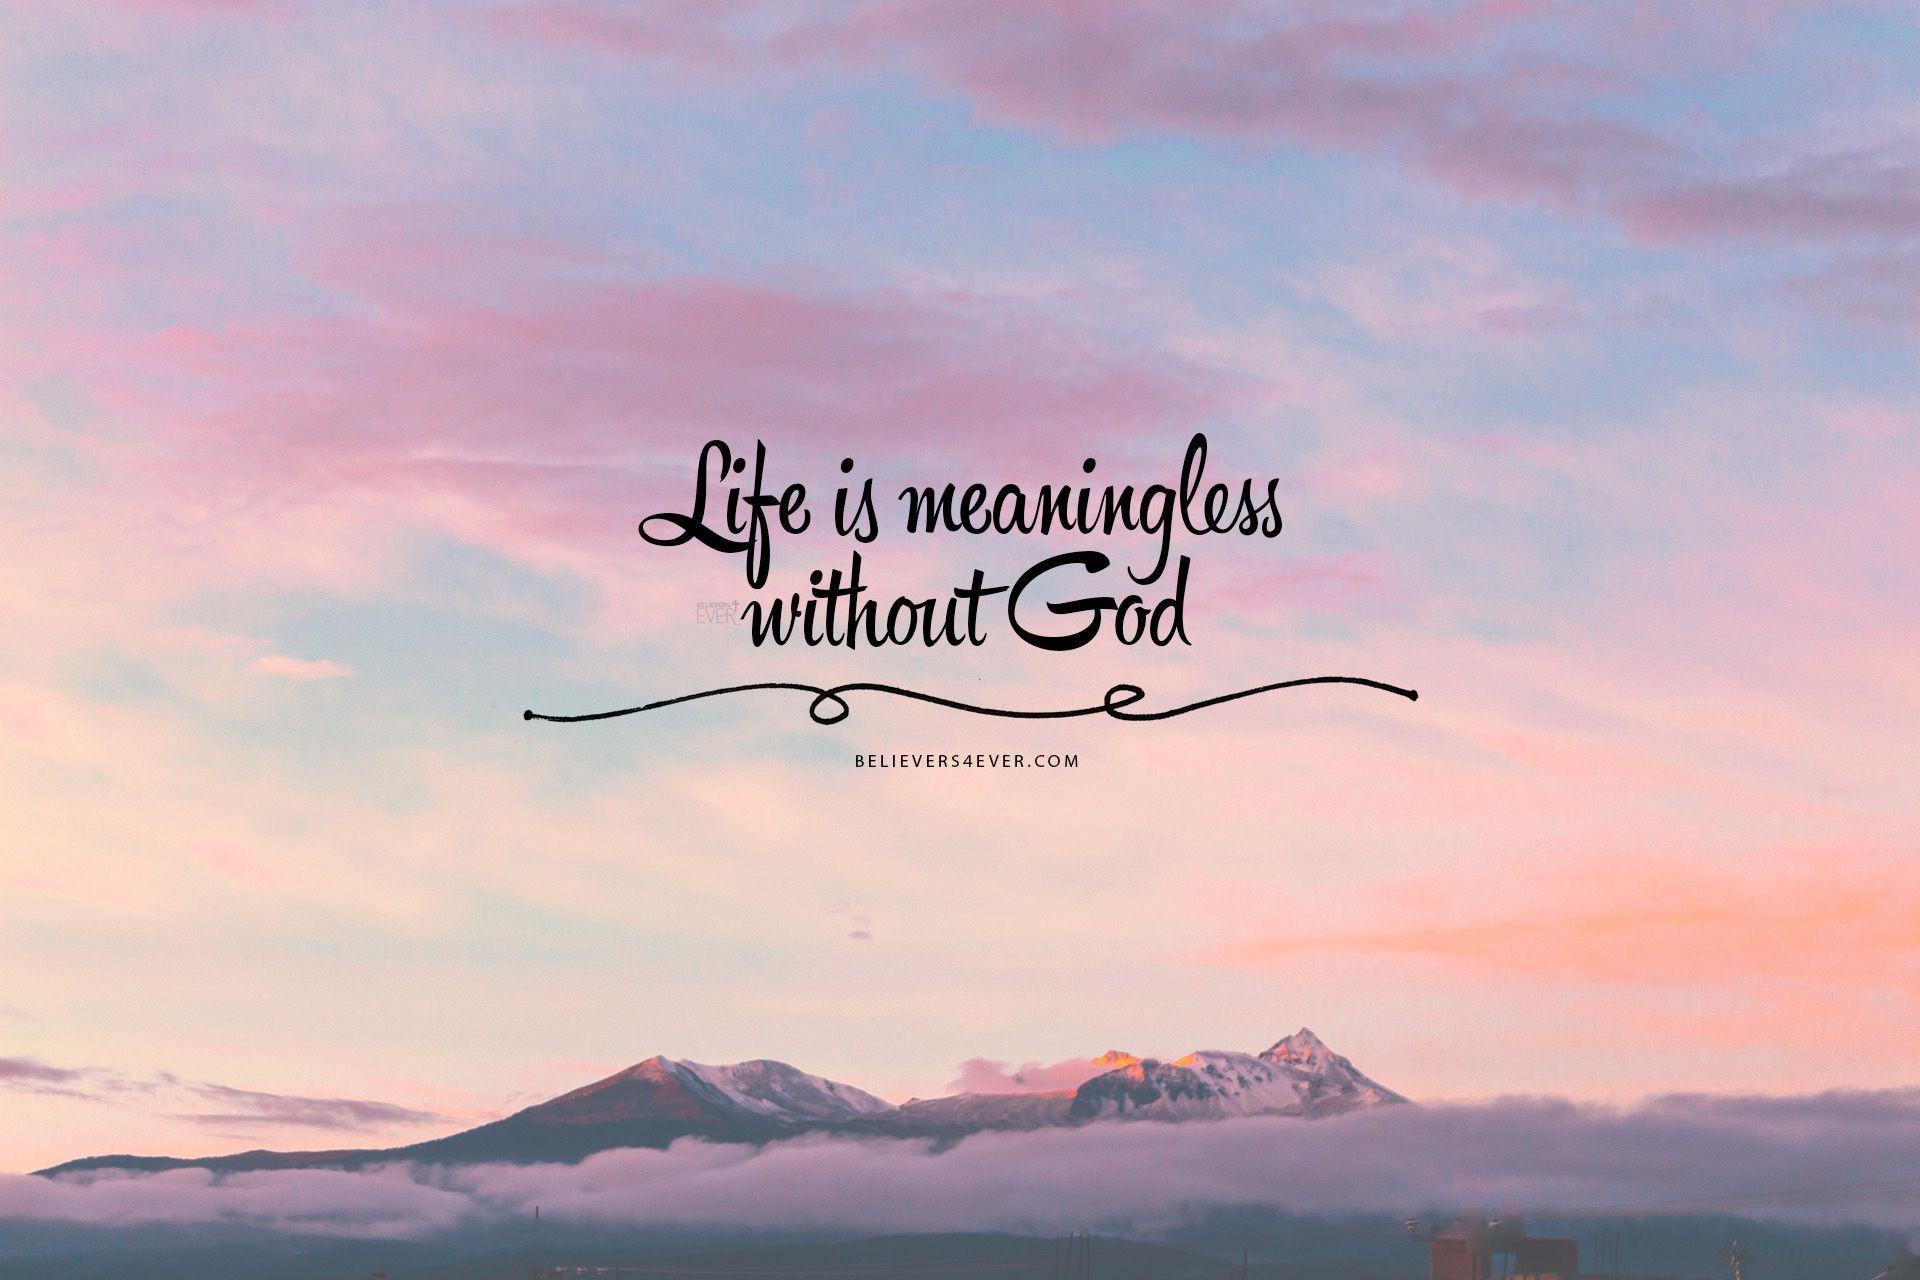 Life is meaningless without God. Bible verse background